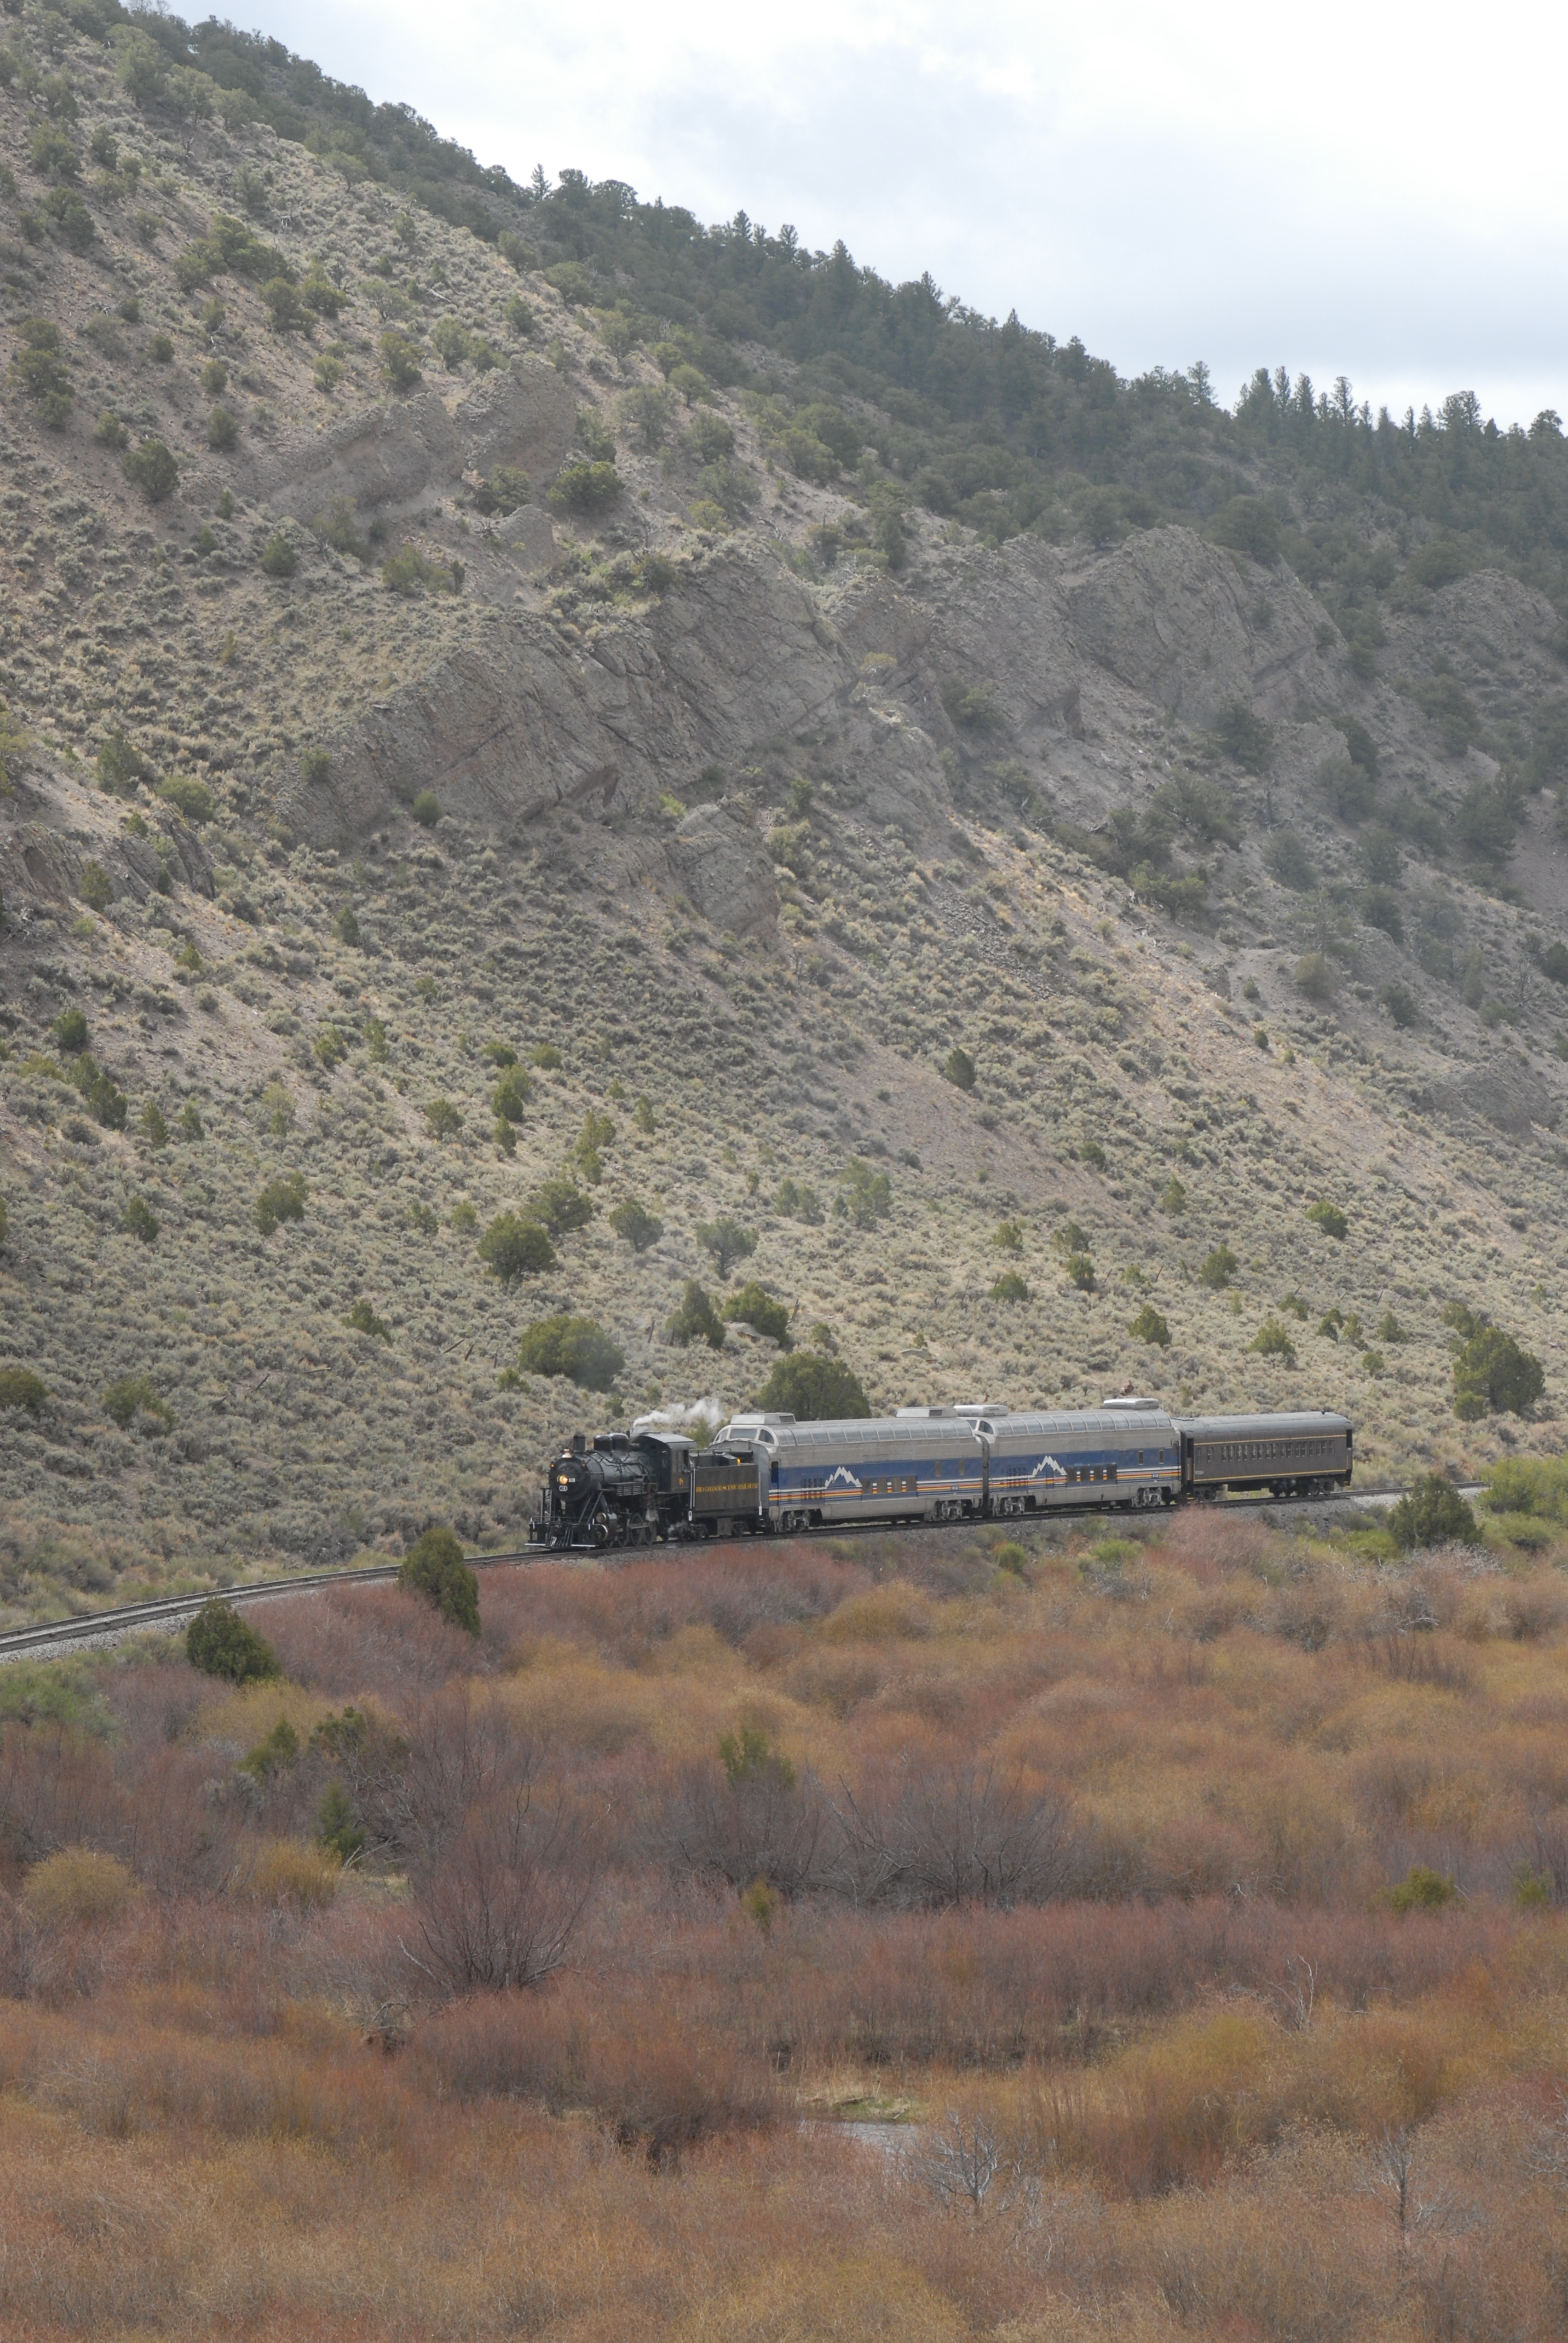 2008. San Luis & Rio Grande #18 and train is dwarfed by Cucharas Range foothills east of Ft. Garland.